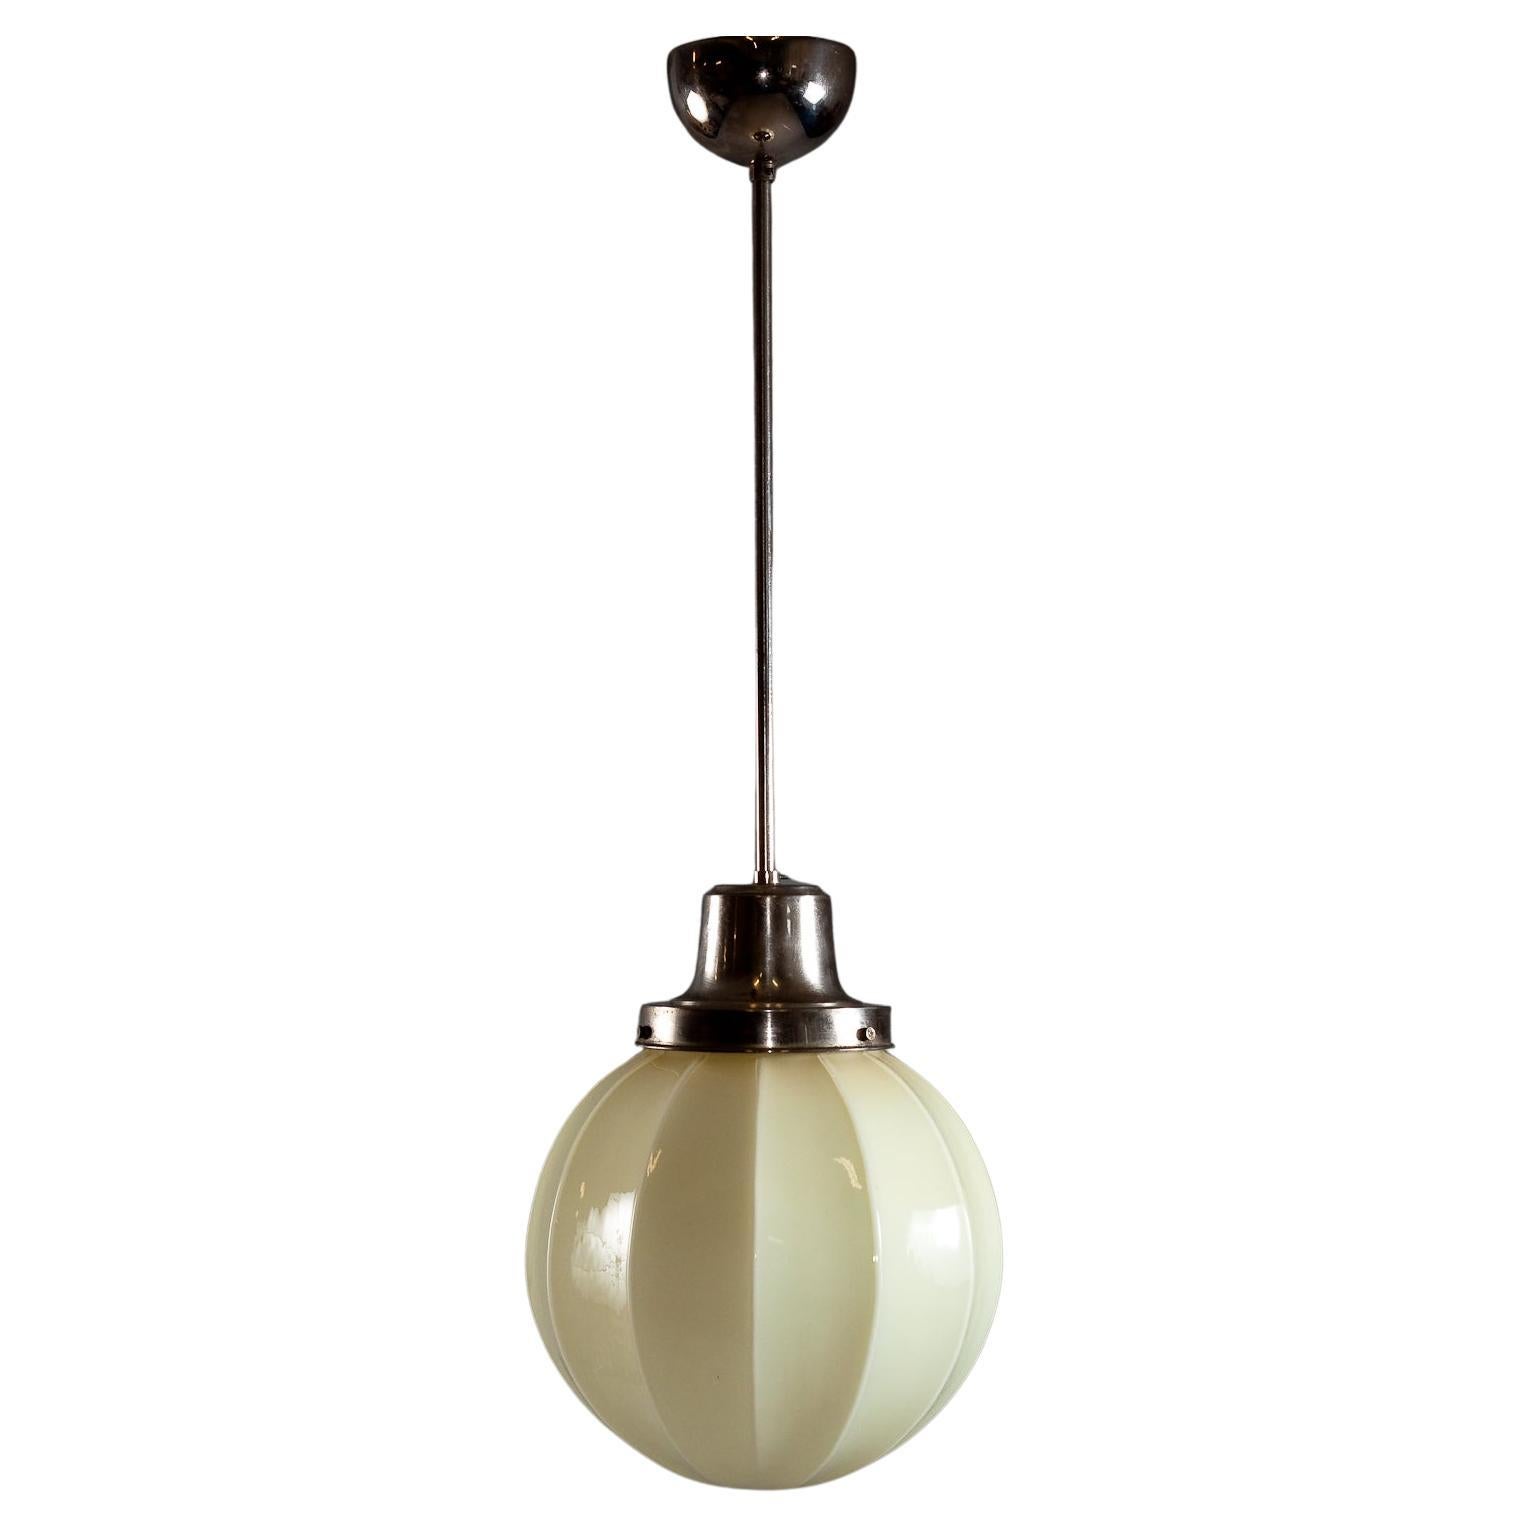 Idman Oy, 1930's opaline ribbed glass ceiling lamp